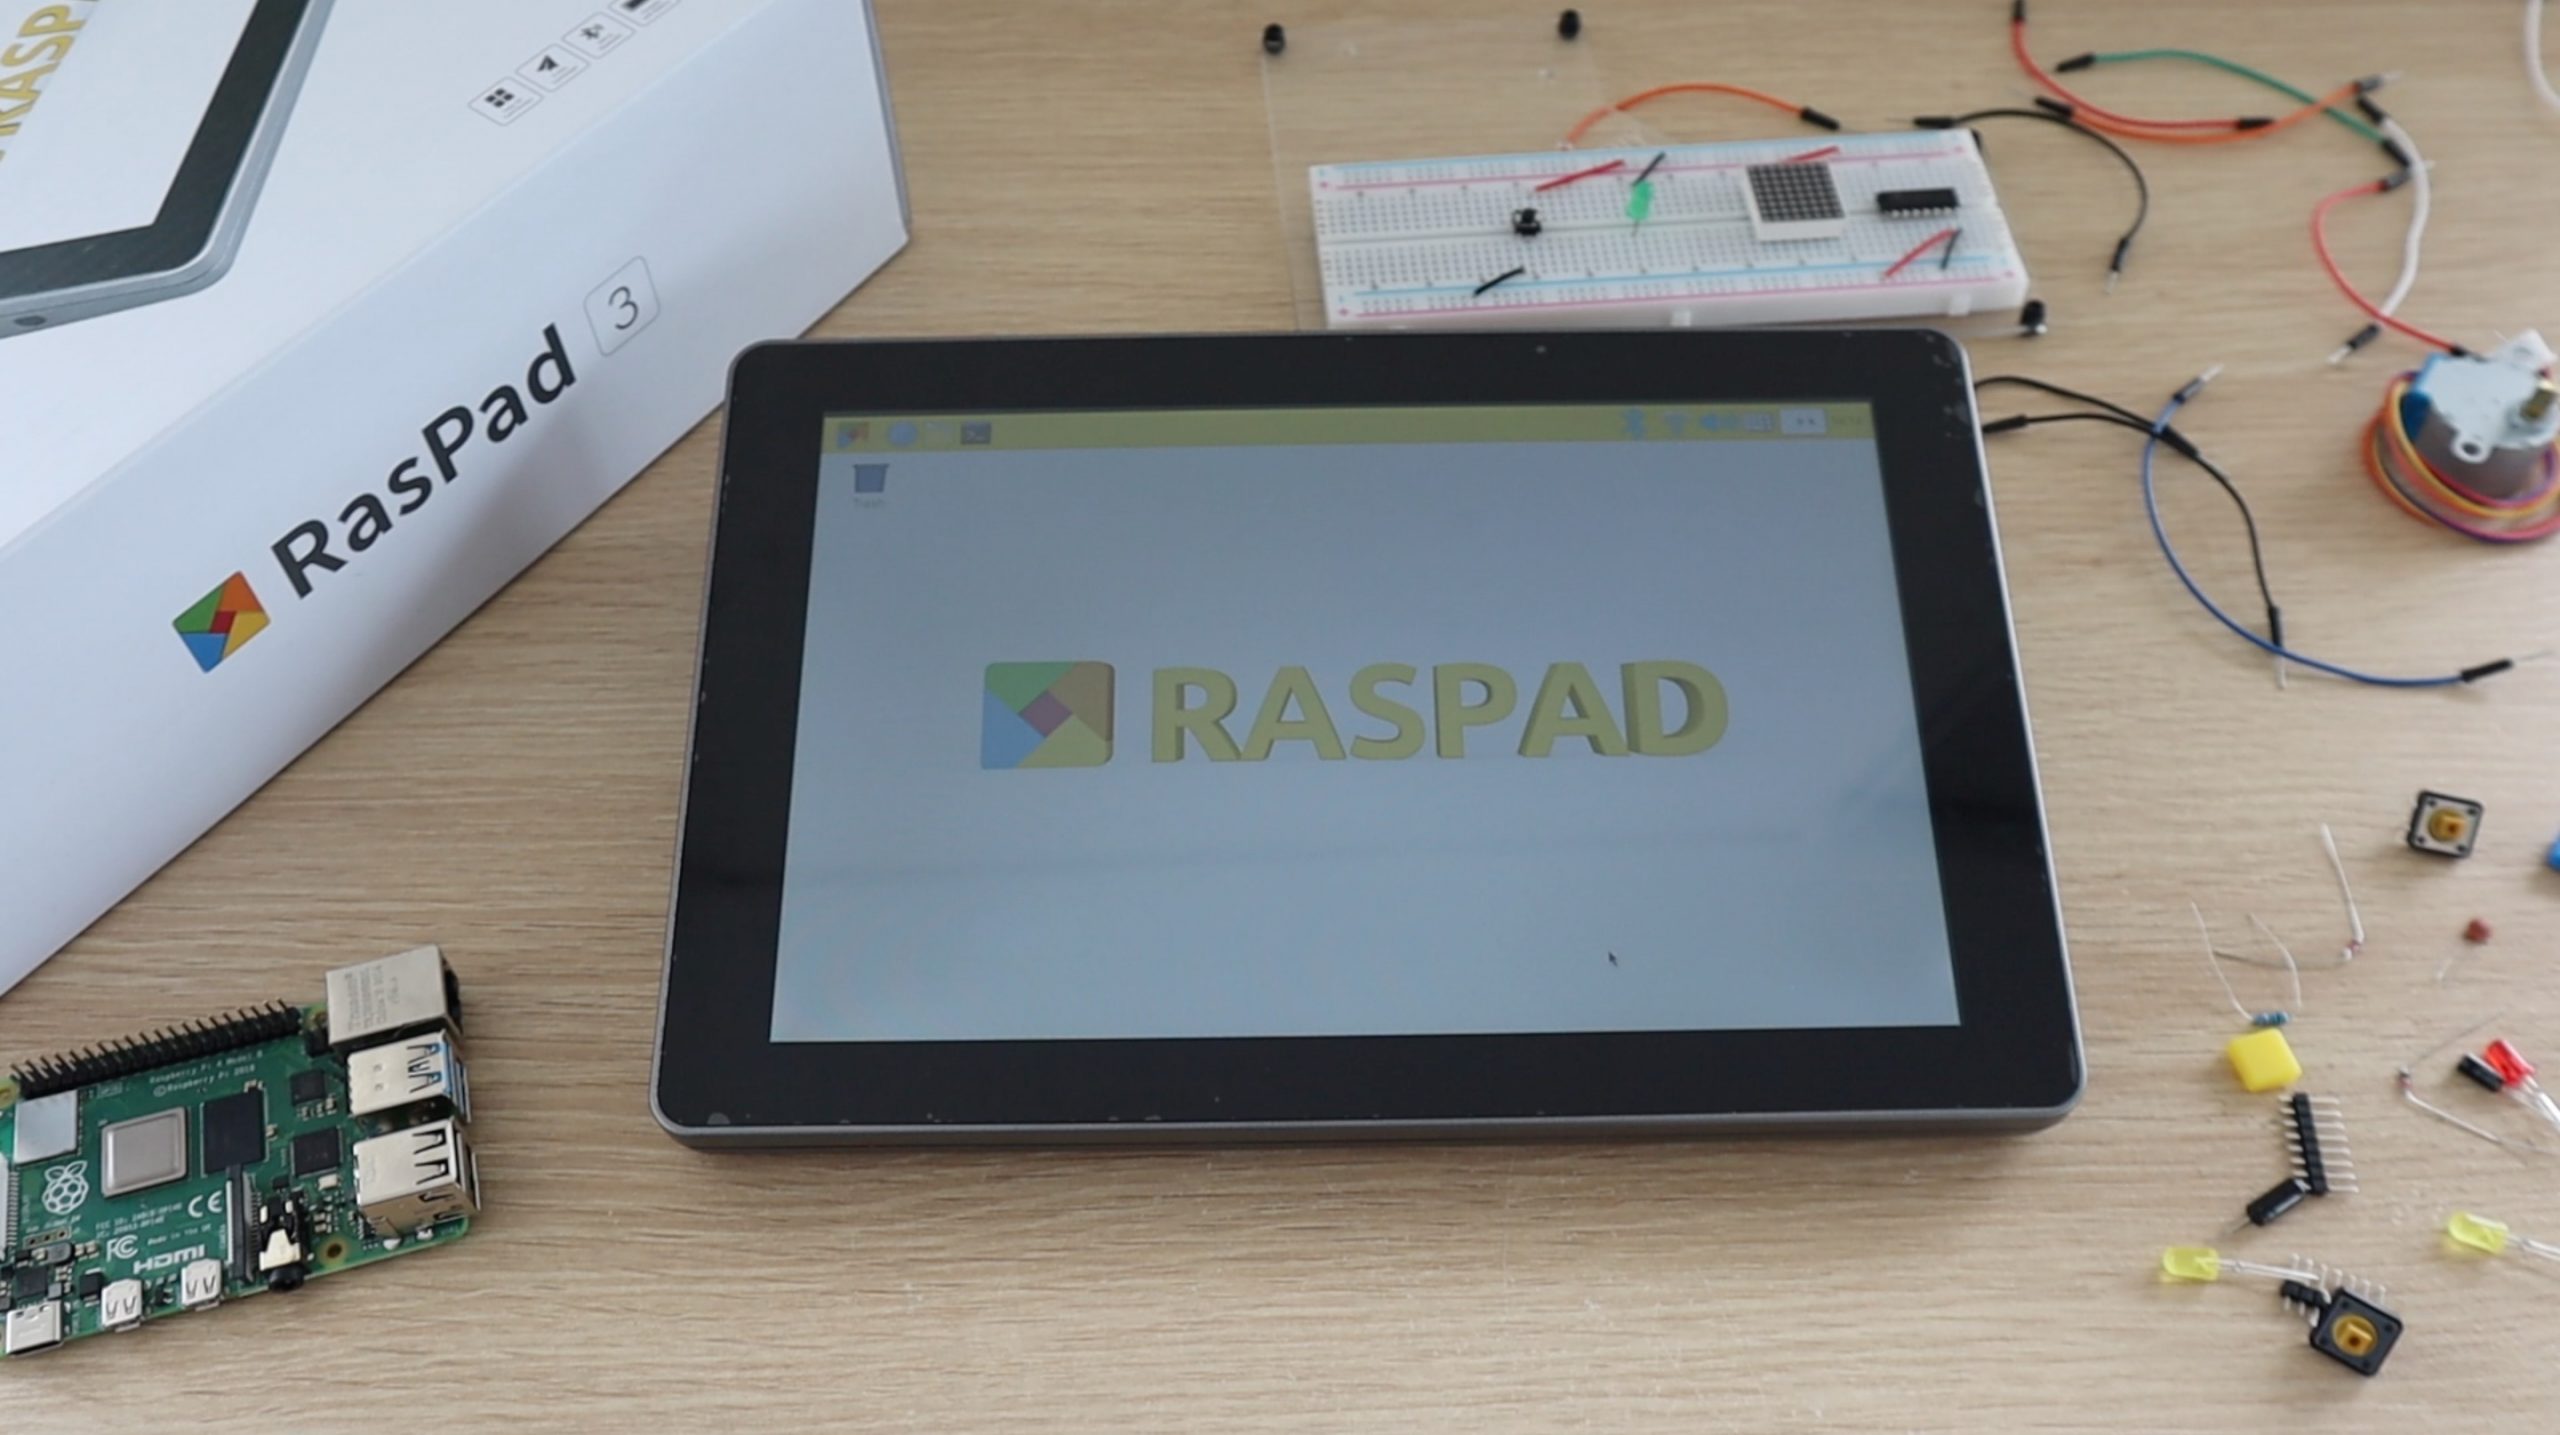 Raspberry pi Zero 2 W Tablet Project - Unboxing and First Use